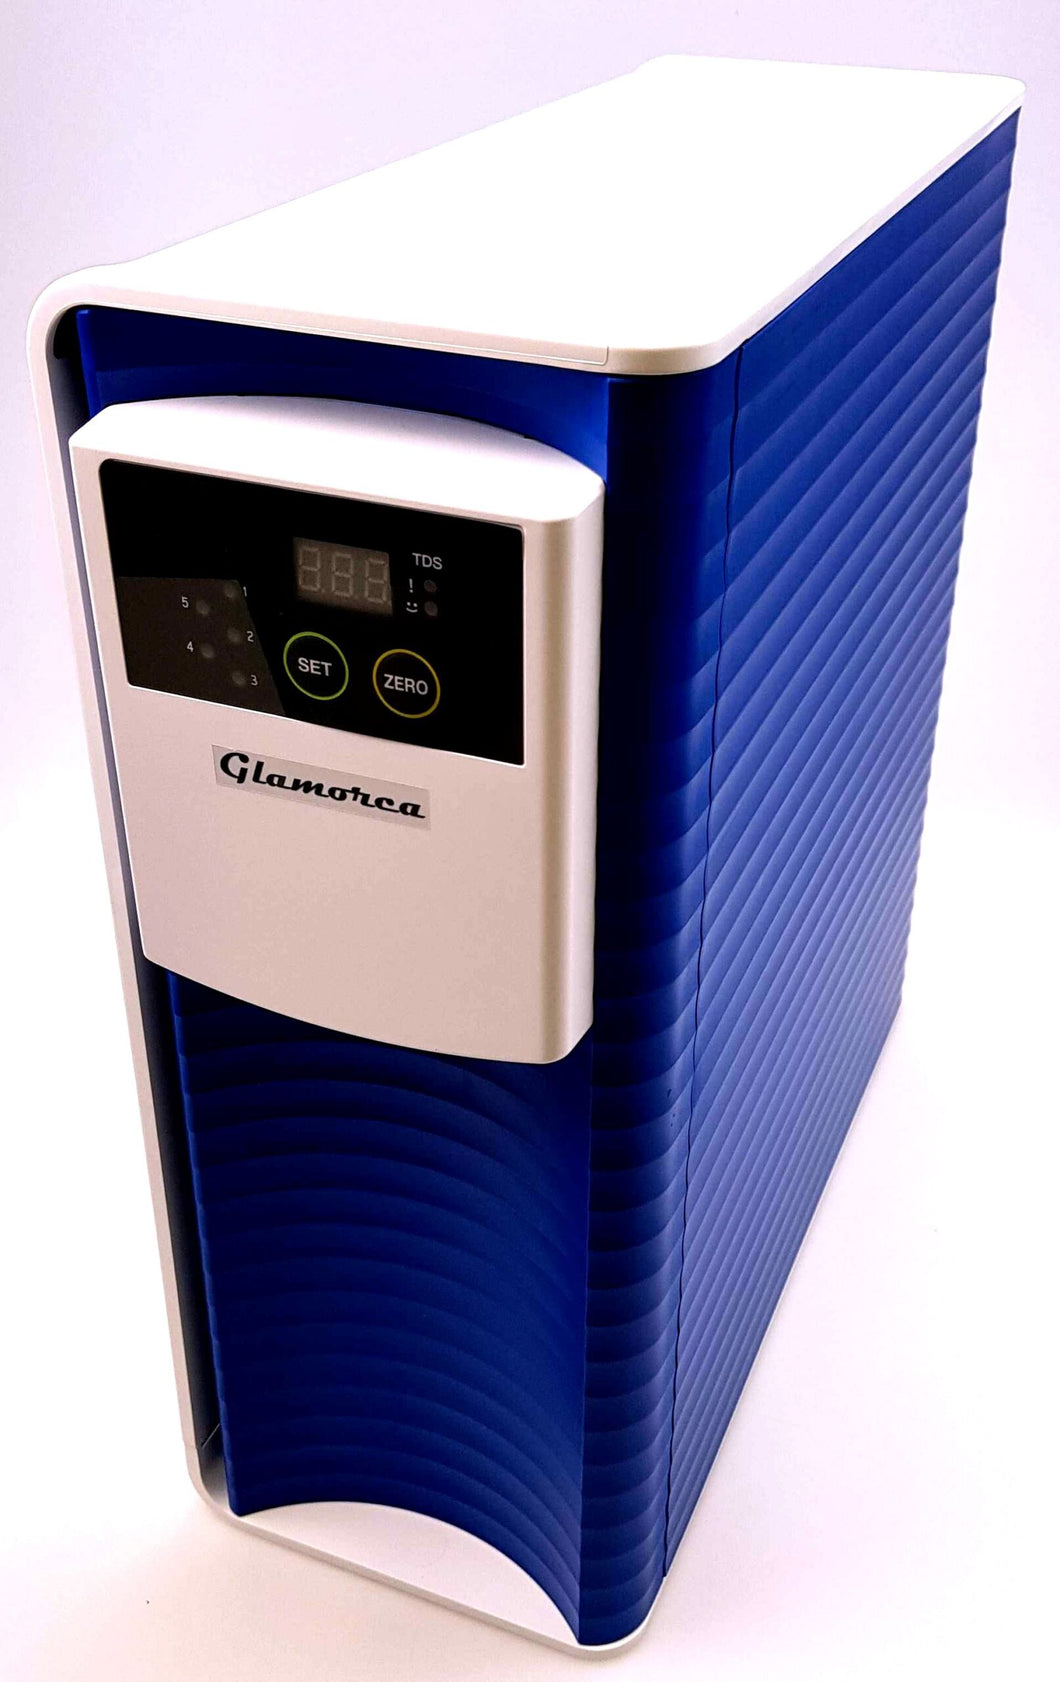 Glamorca RO-1 unit with built in TDS meter